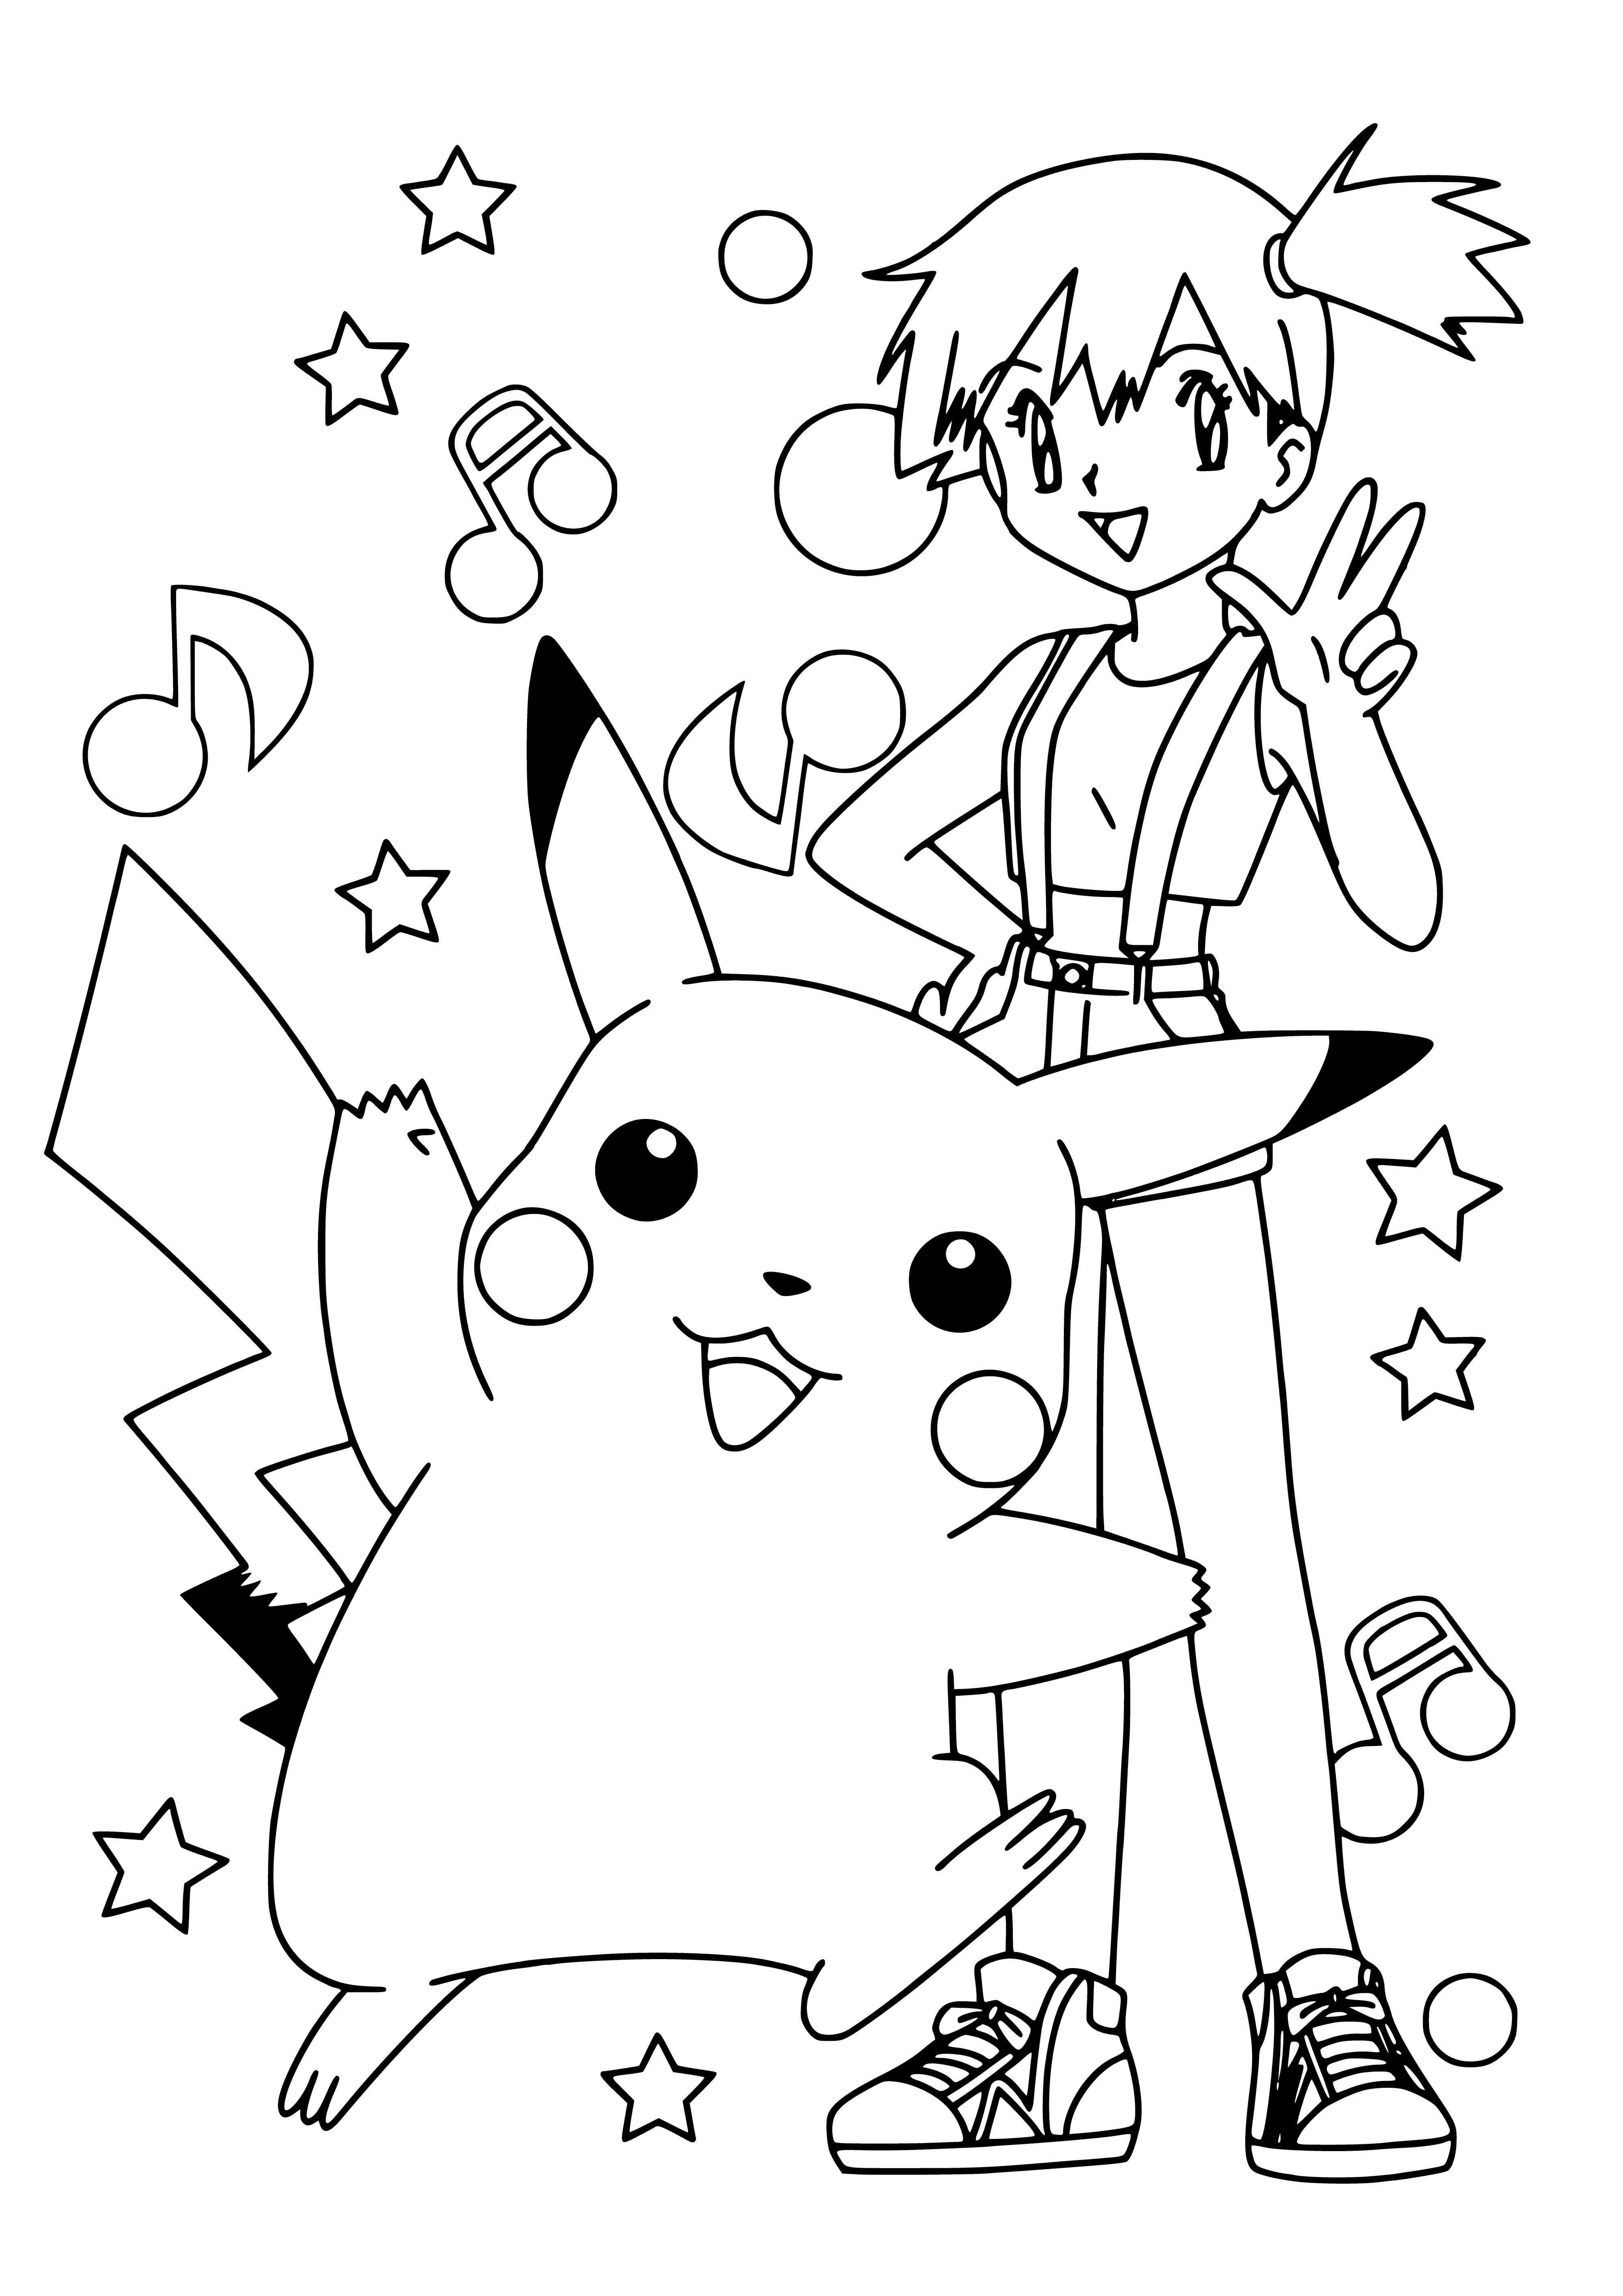 Pikachu and Misty coloring page